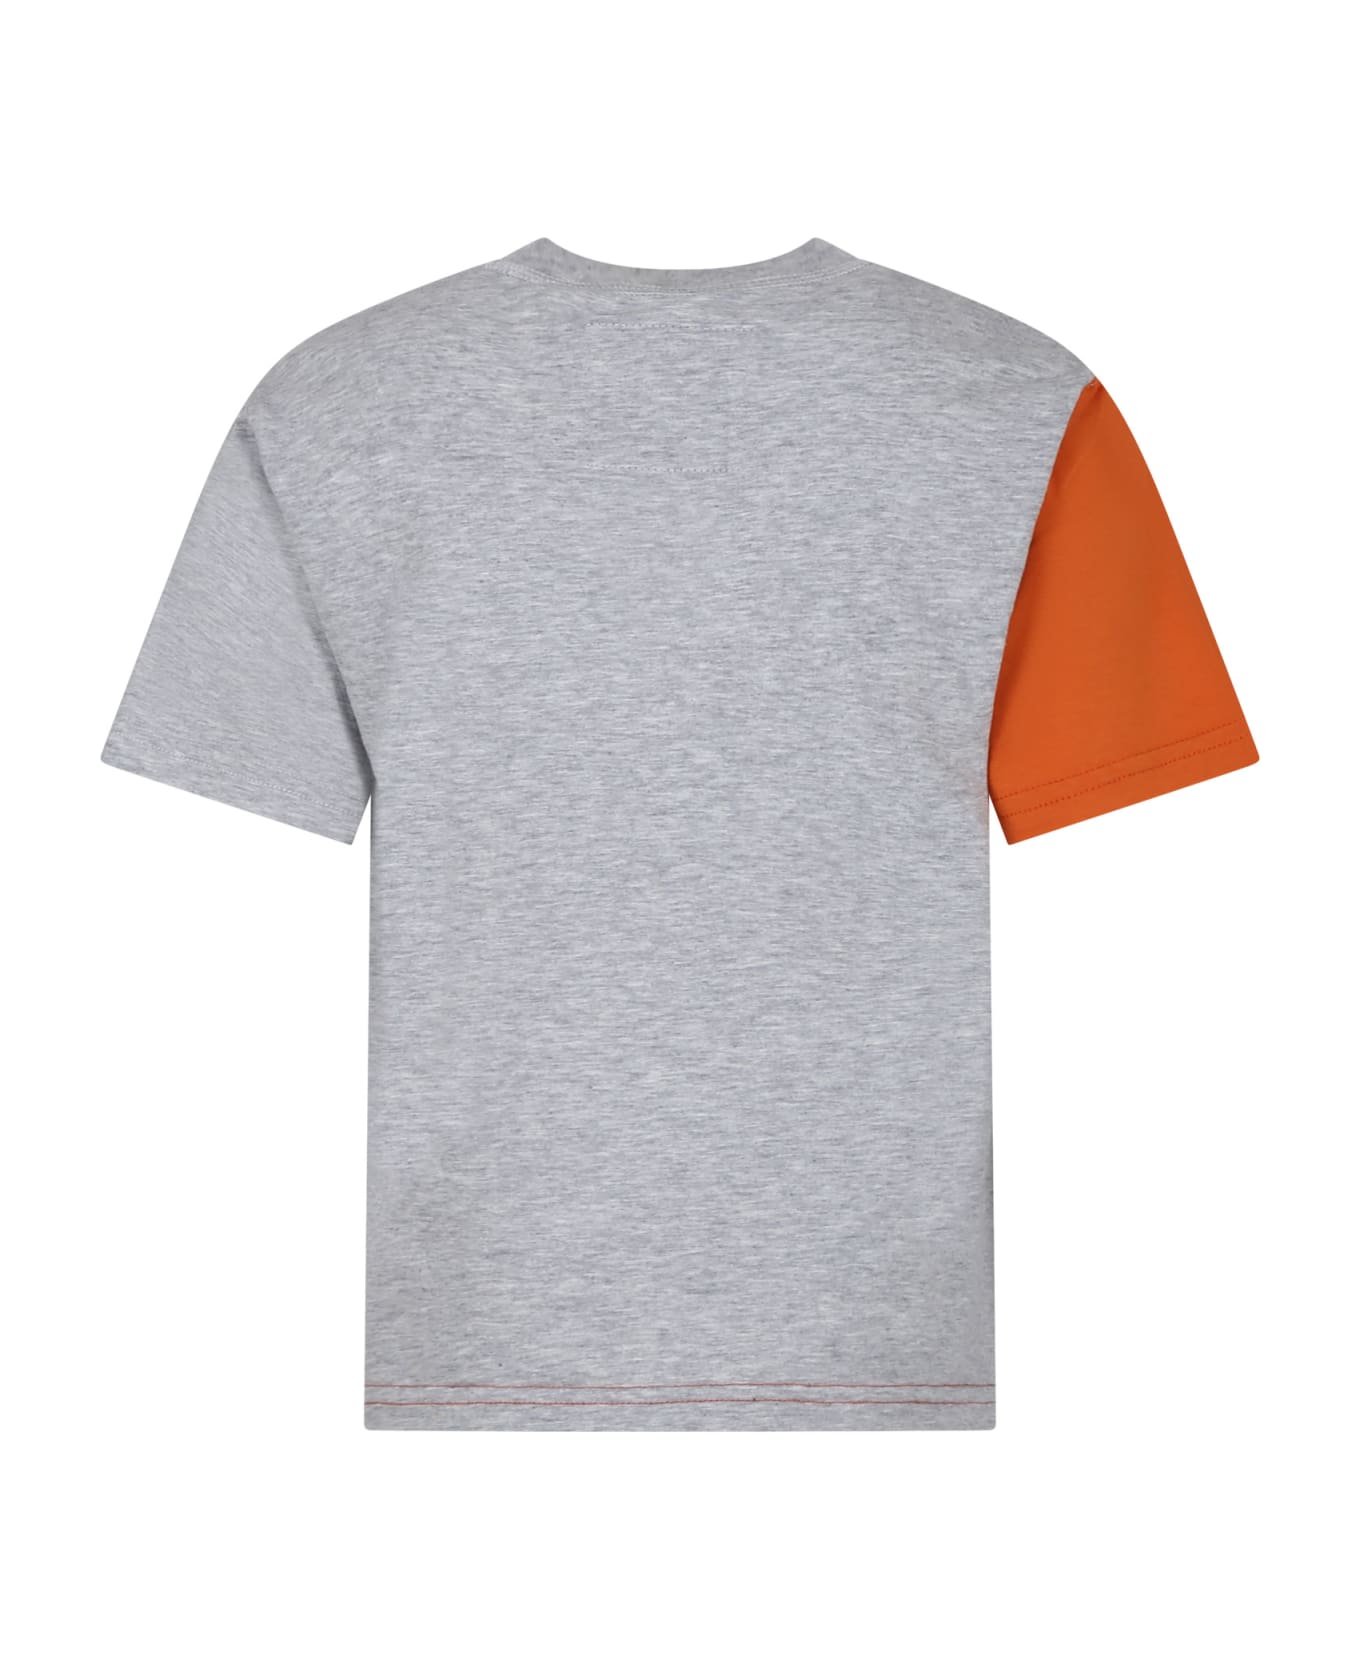 MYAR Gray T-shirt For Boy With Print - Multicolor